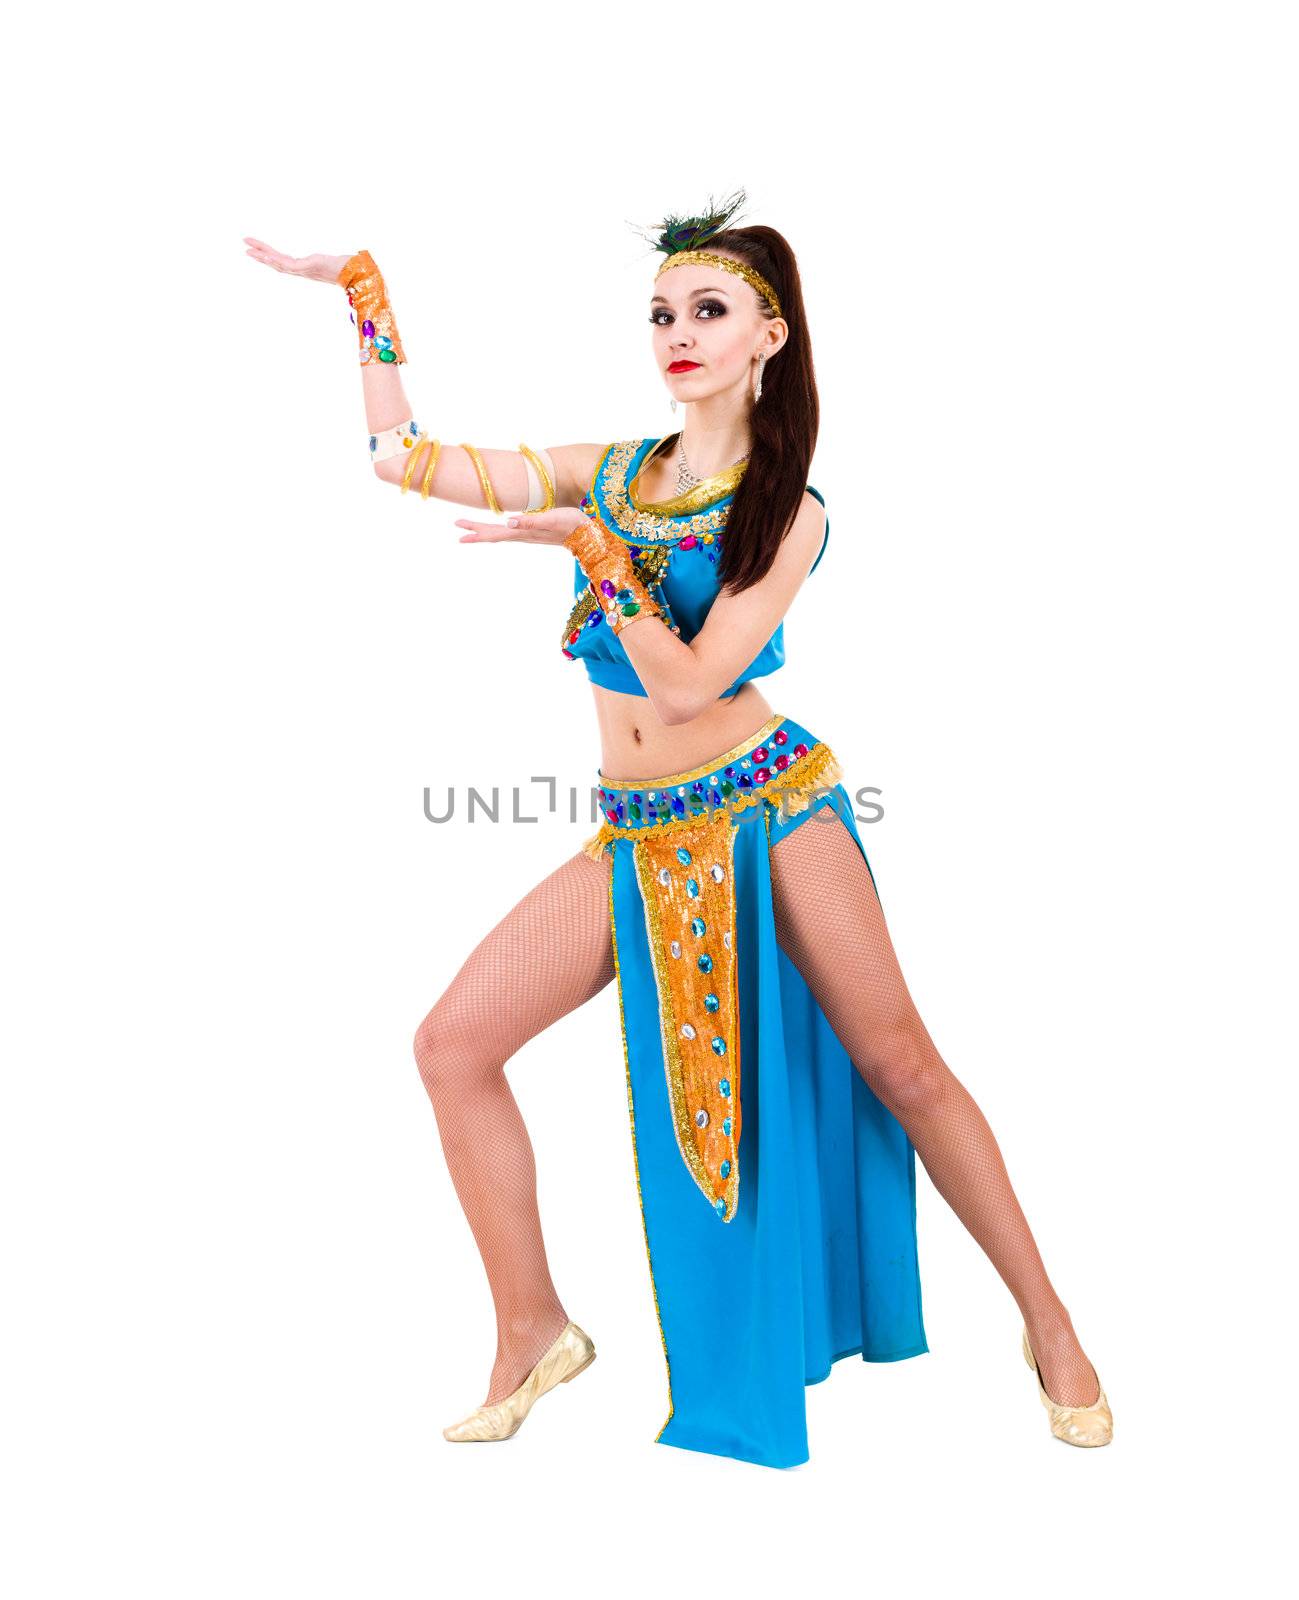 Dancing pharaoh woman wearing a egyptian costume. Isolated on white background in full length.